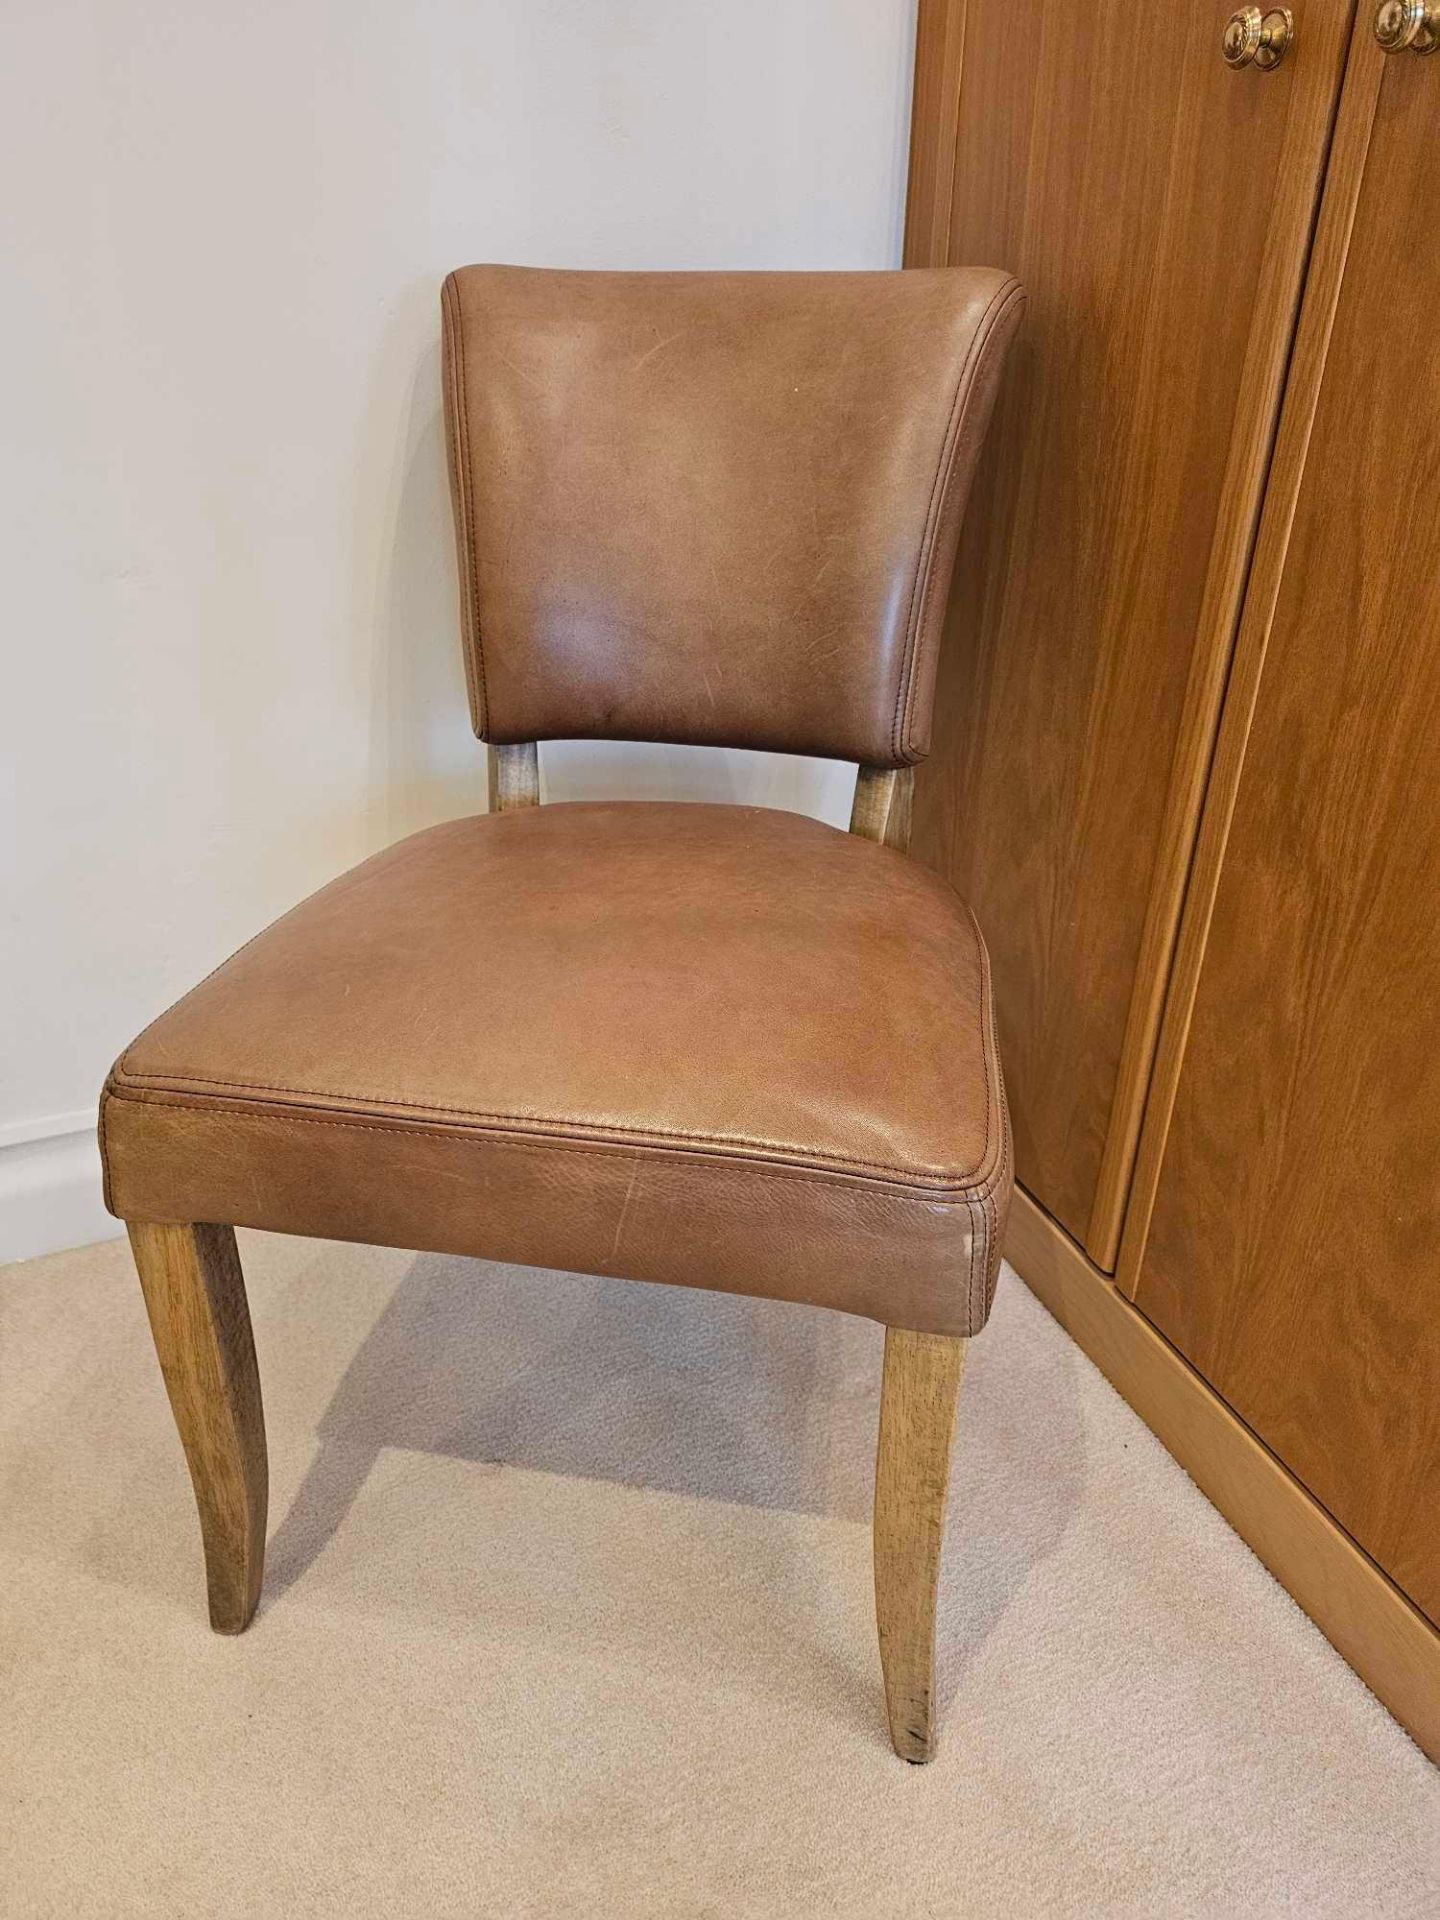 Timothy Oulton Mimi Brown Leather Studded Side Chair With Weathered Oak Legs Seat Height: 51cm - Image 2 of 3